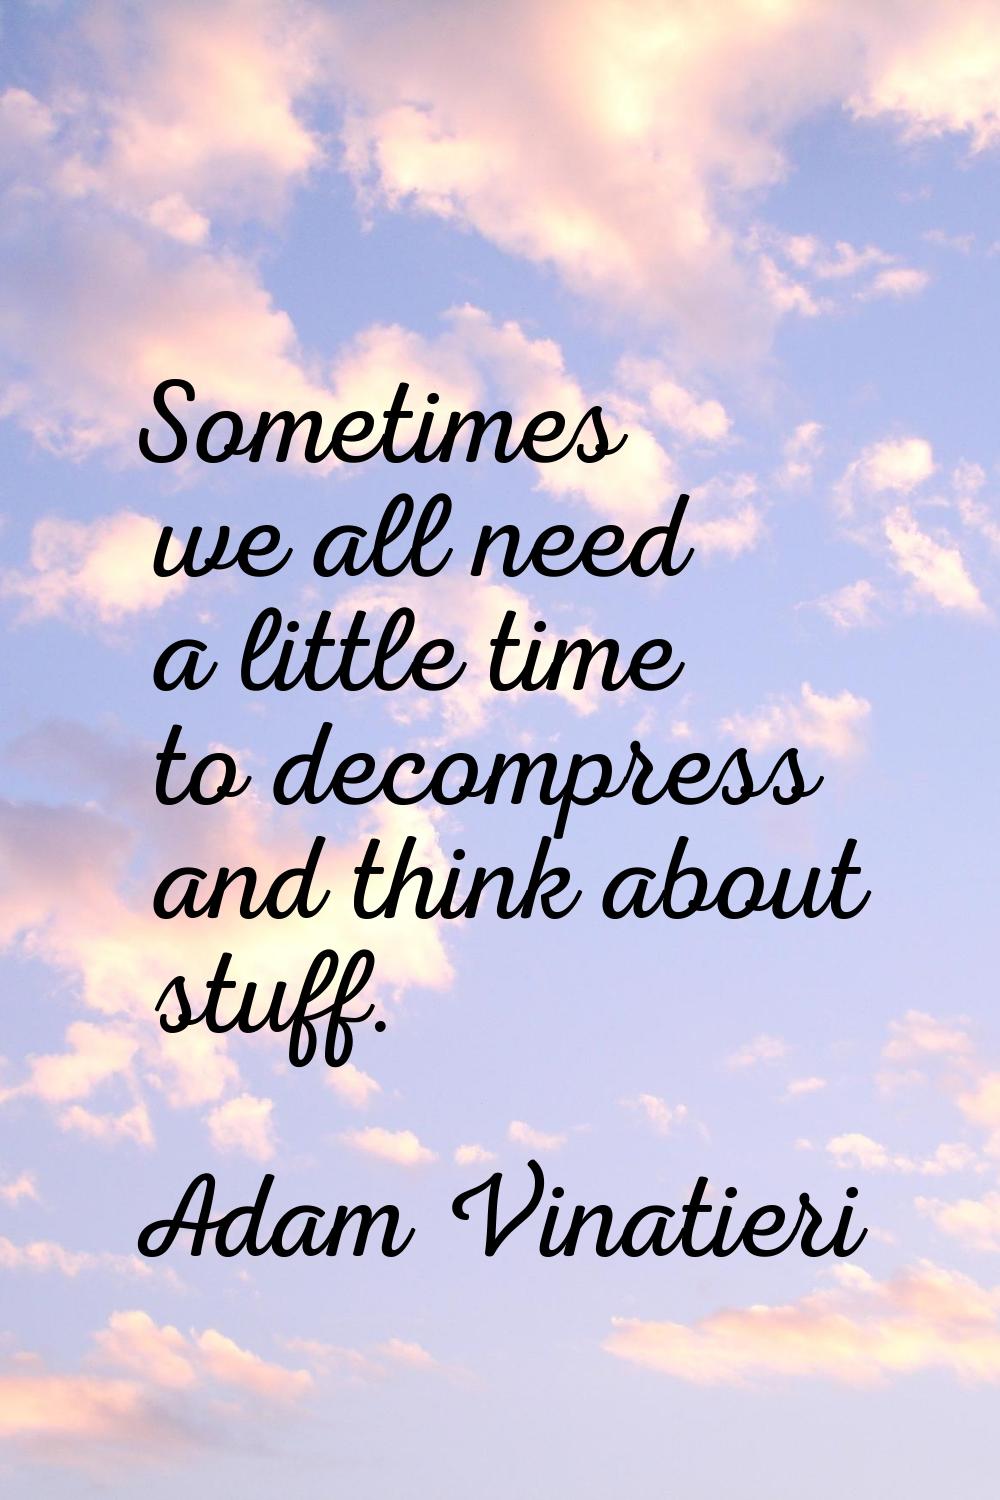 Sometimes we all need a little time to decompress and think about stuff.